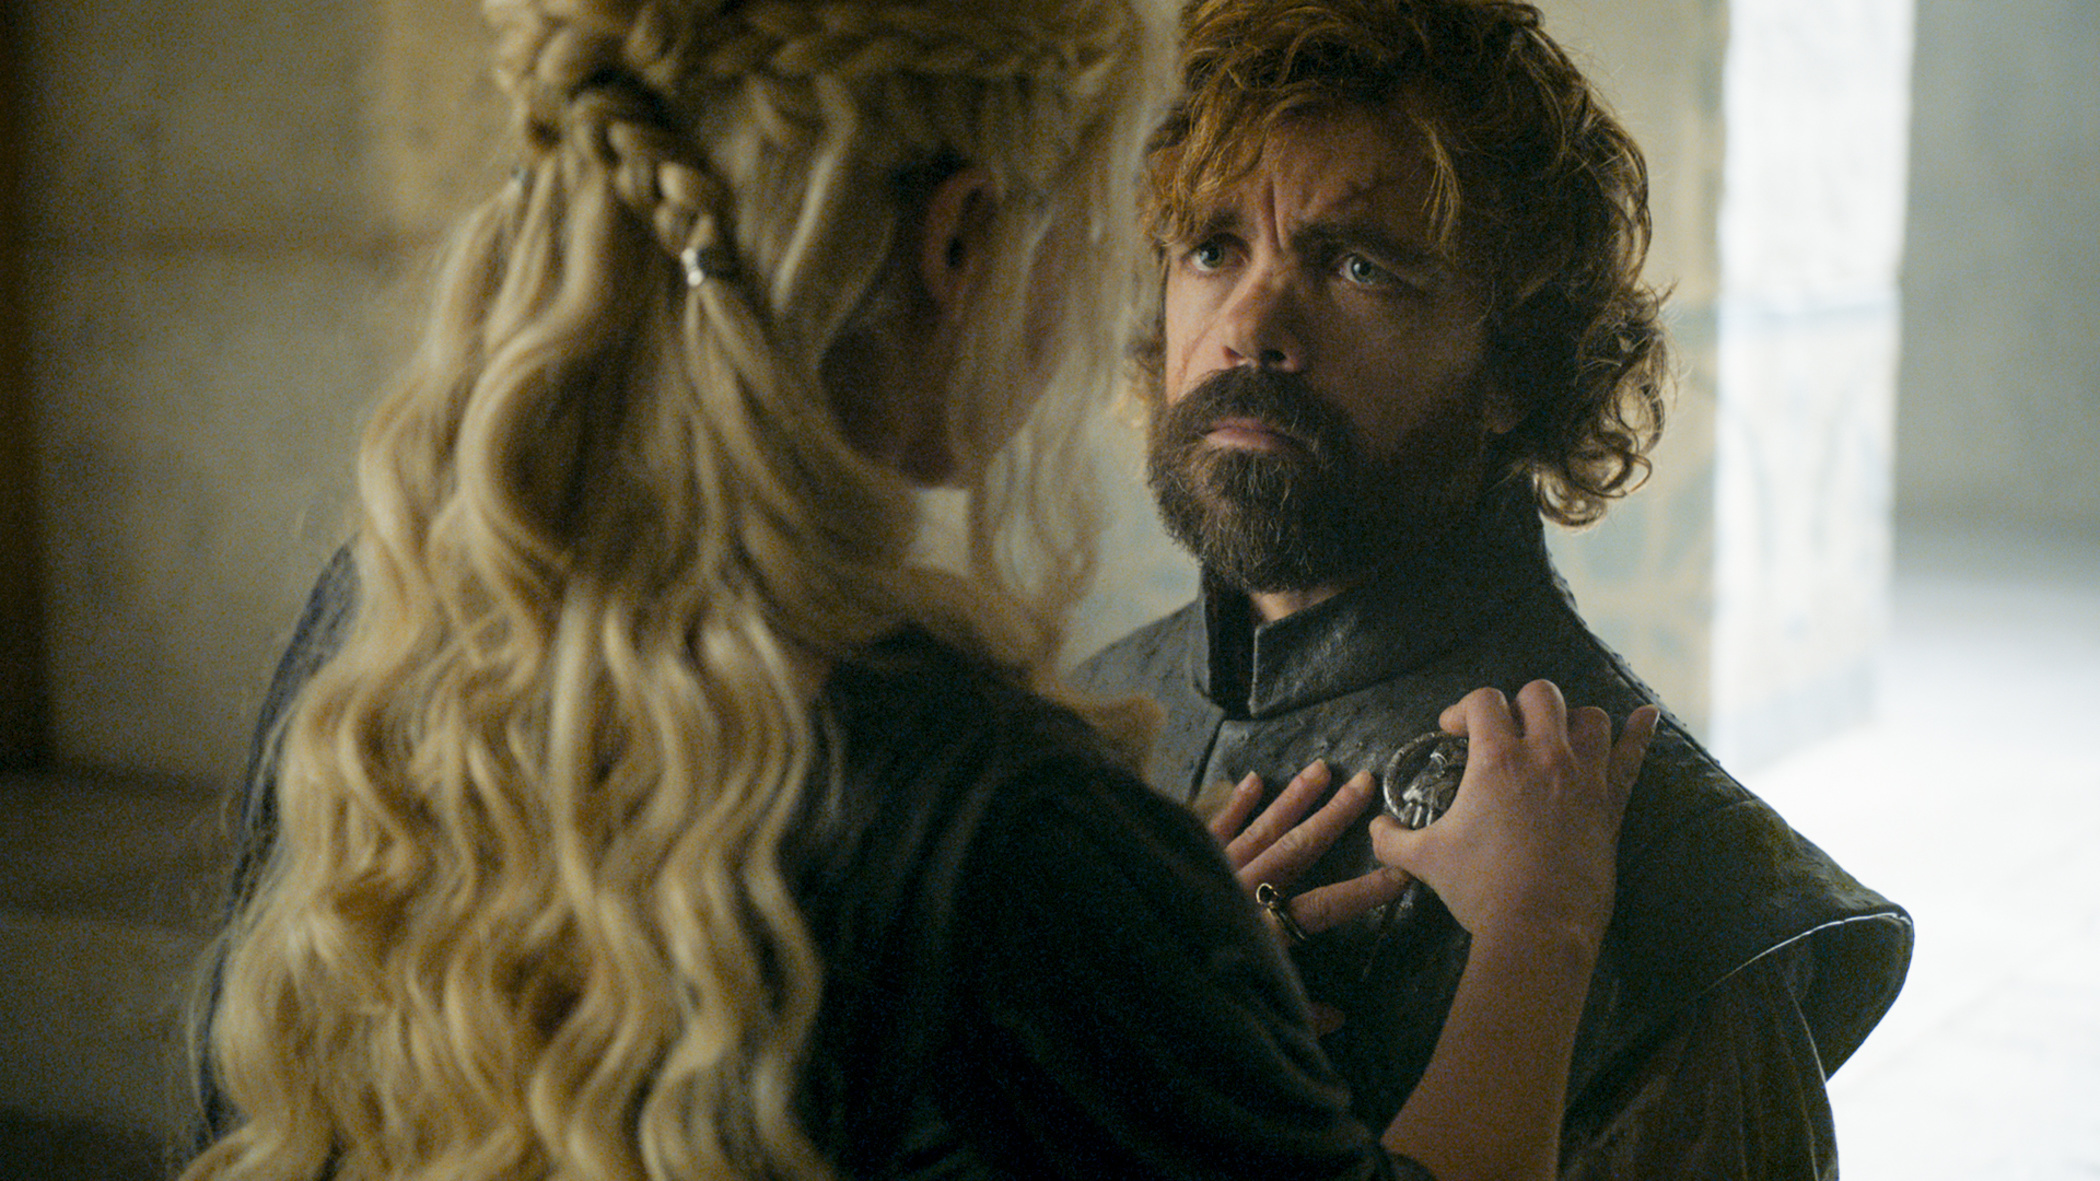 Emilia Clarke and Peter Dinklage on Game of Thrones